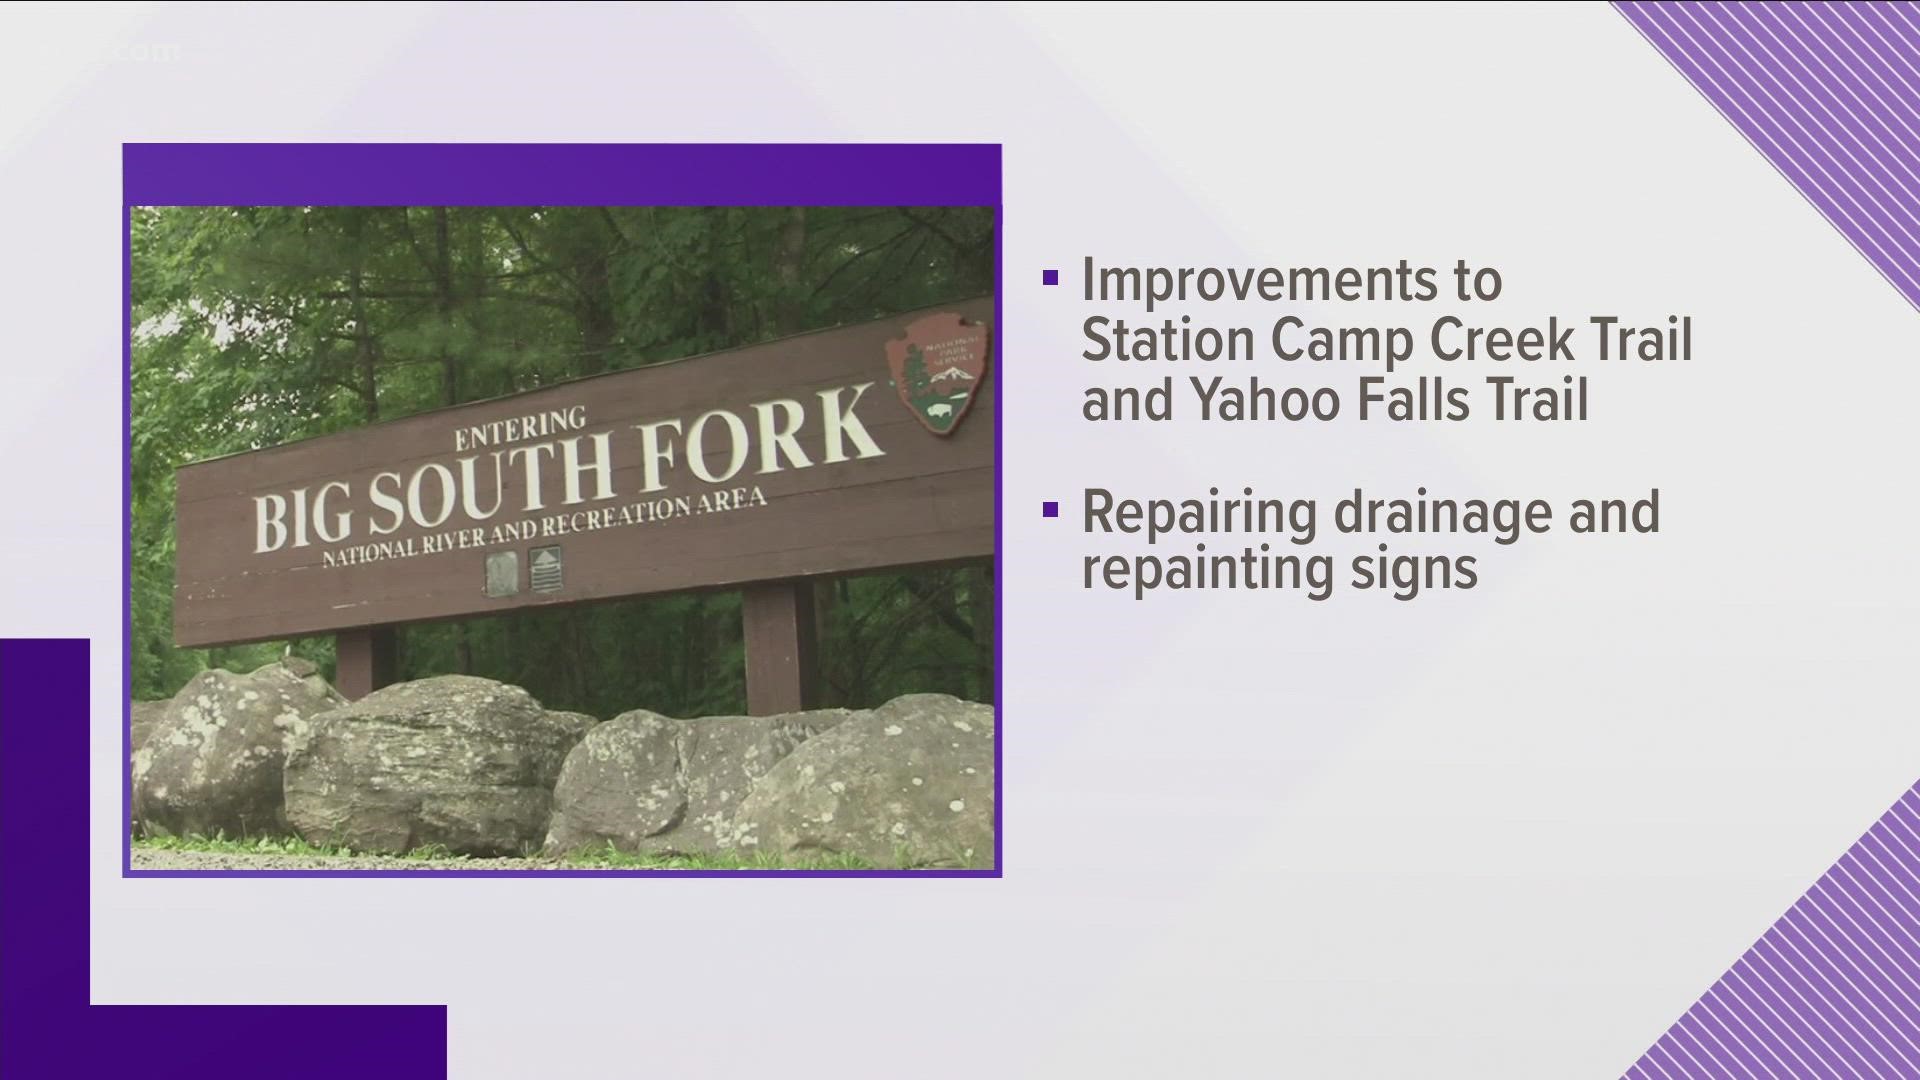 Big South Fork working on repairing two popular Tennessee and Kentucky trails